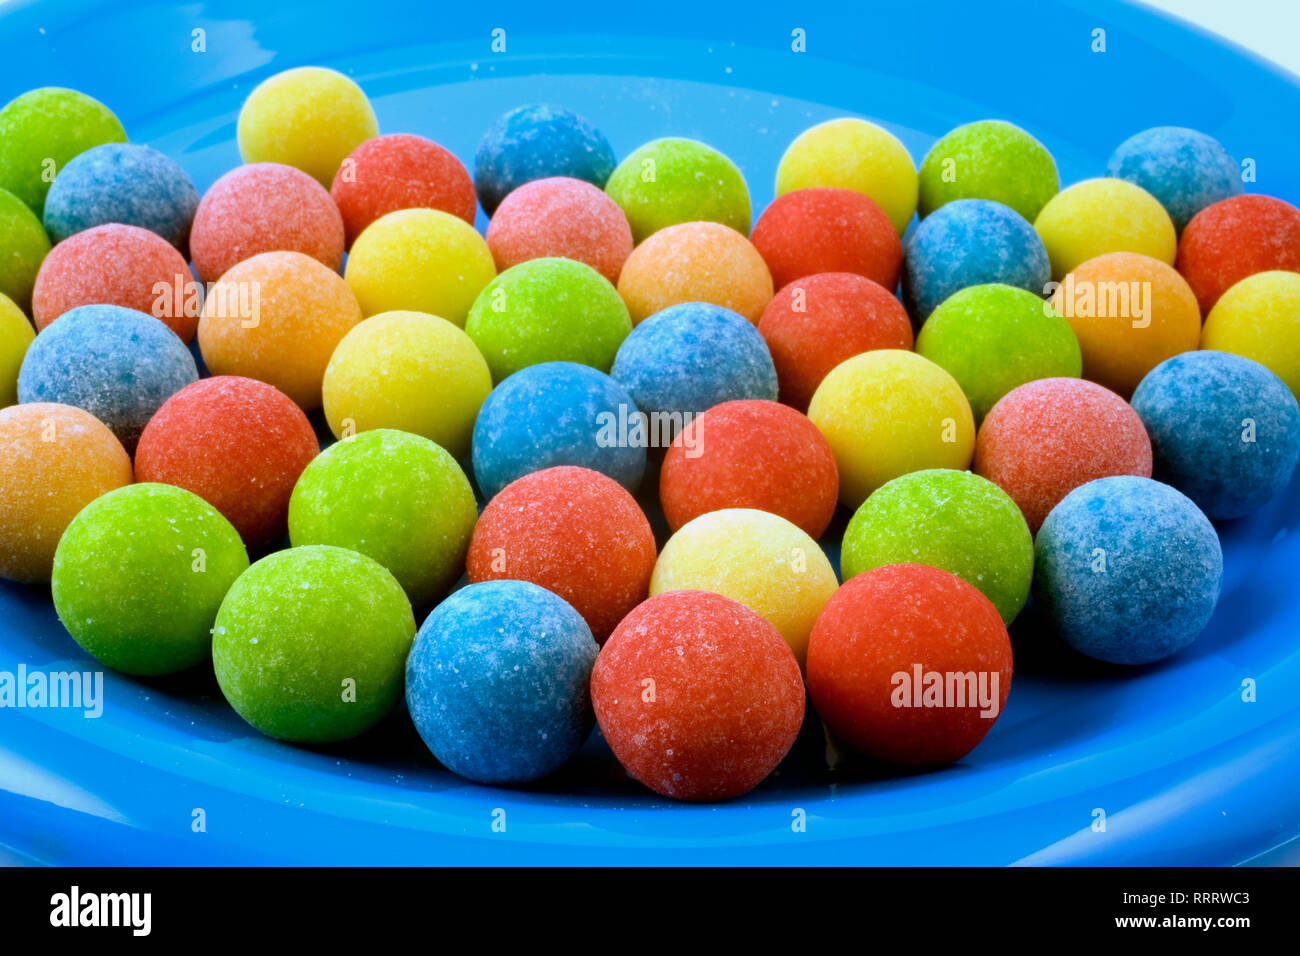 Close-up of frosted gum ball candies in a blue plastic plate Stock Photo